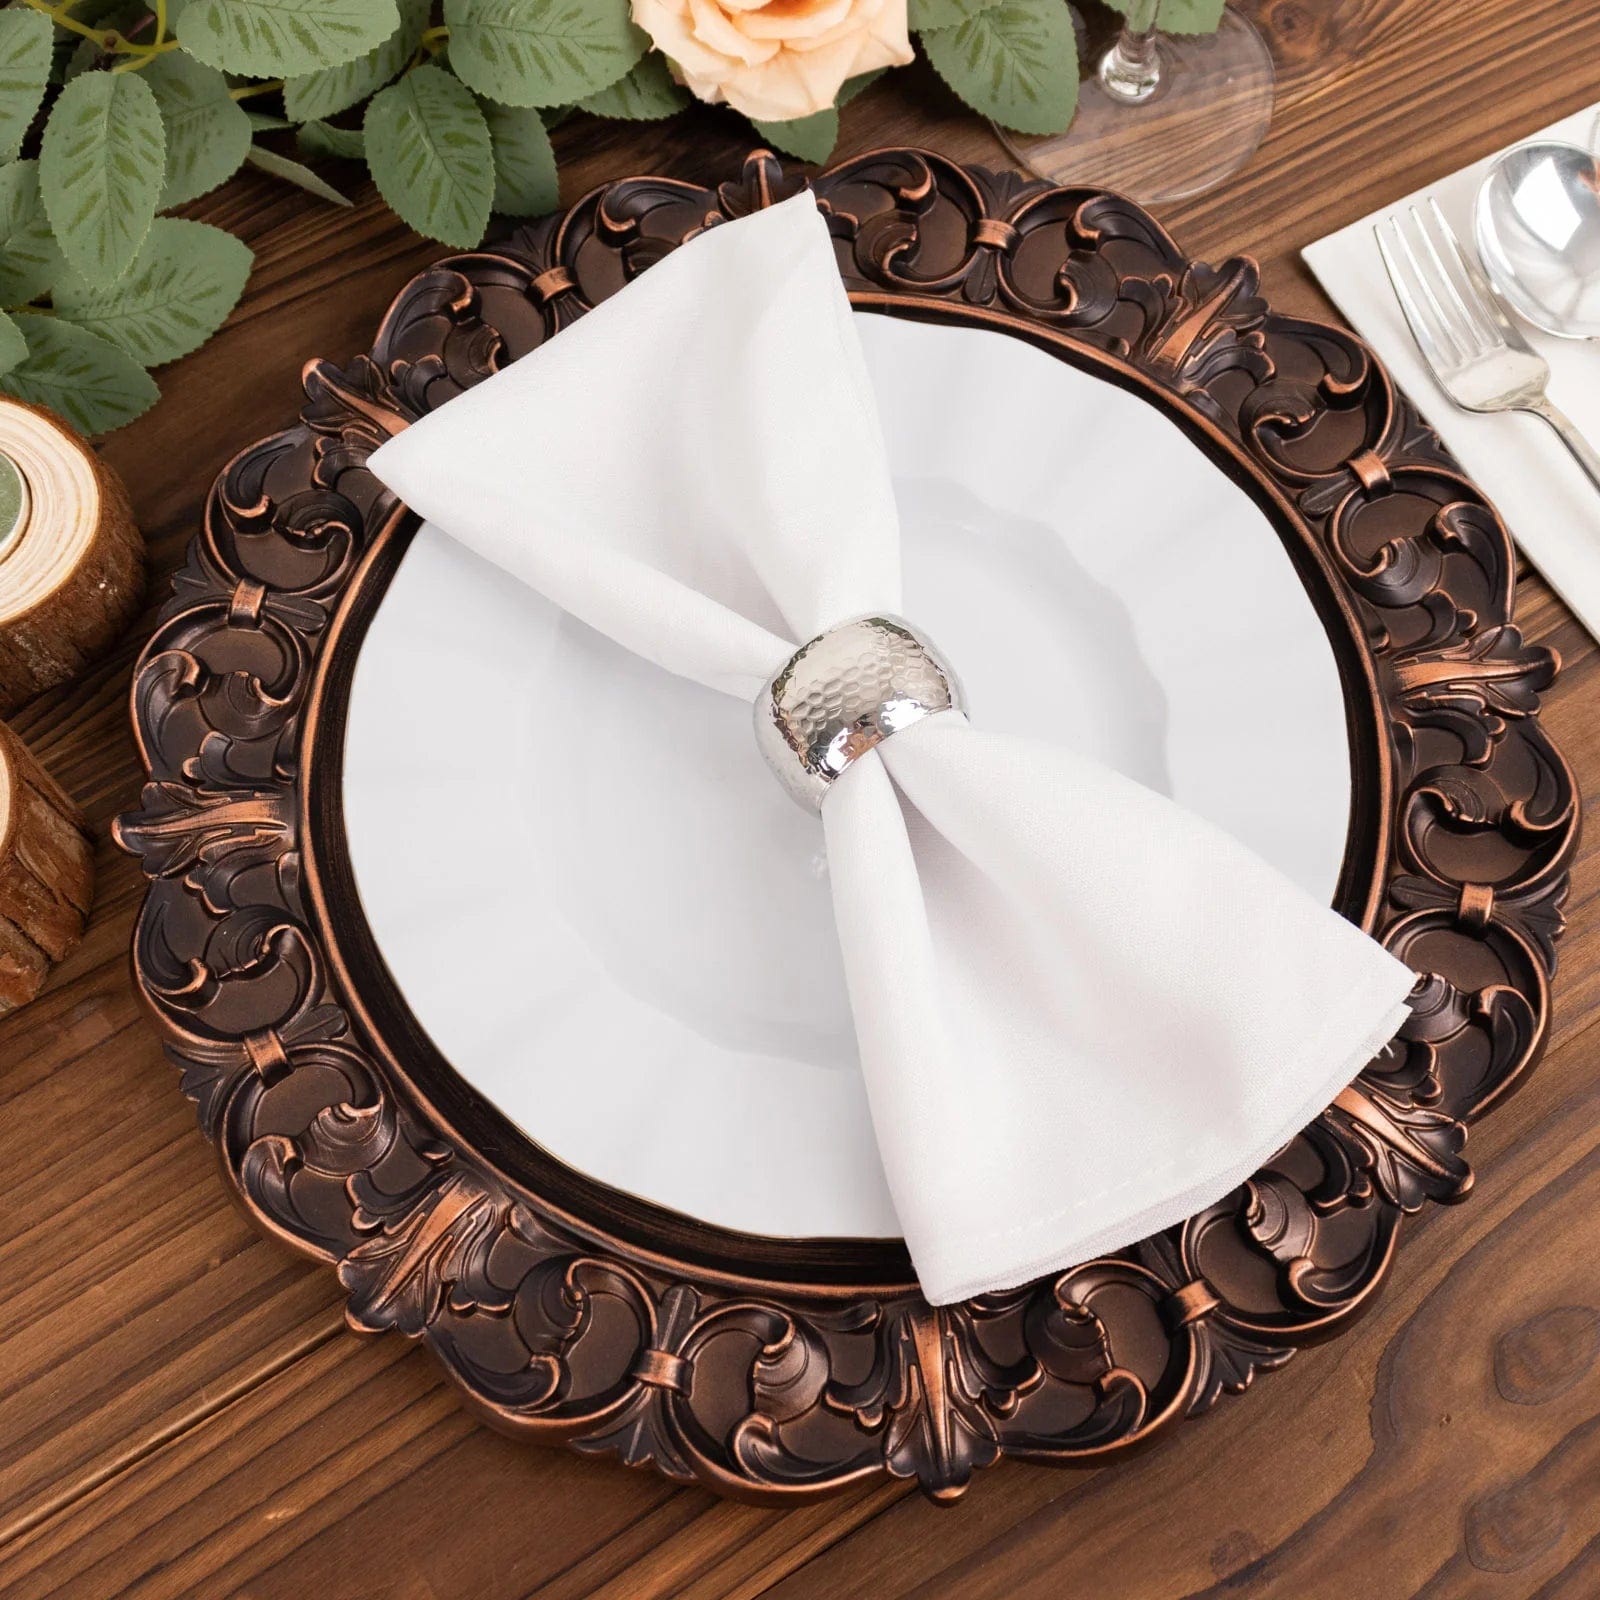 6 Dark Brown 13 in Aristocrat Style Round Charger Plates with Embossed Rim